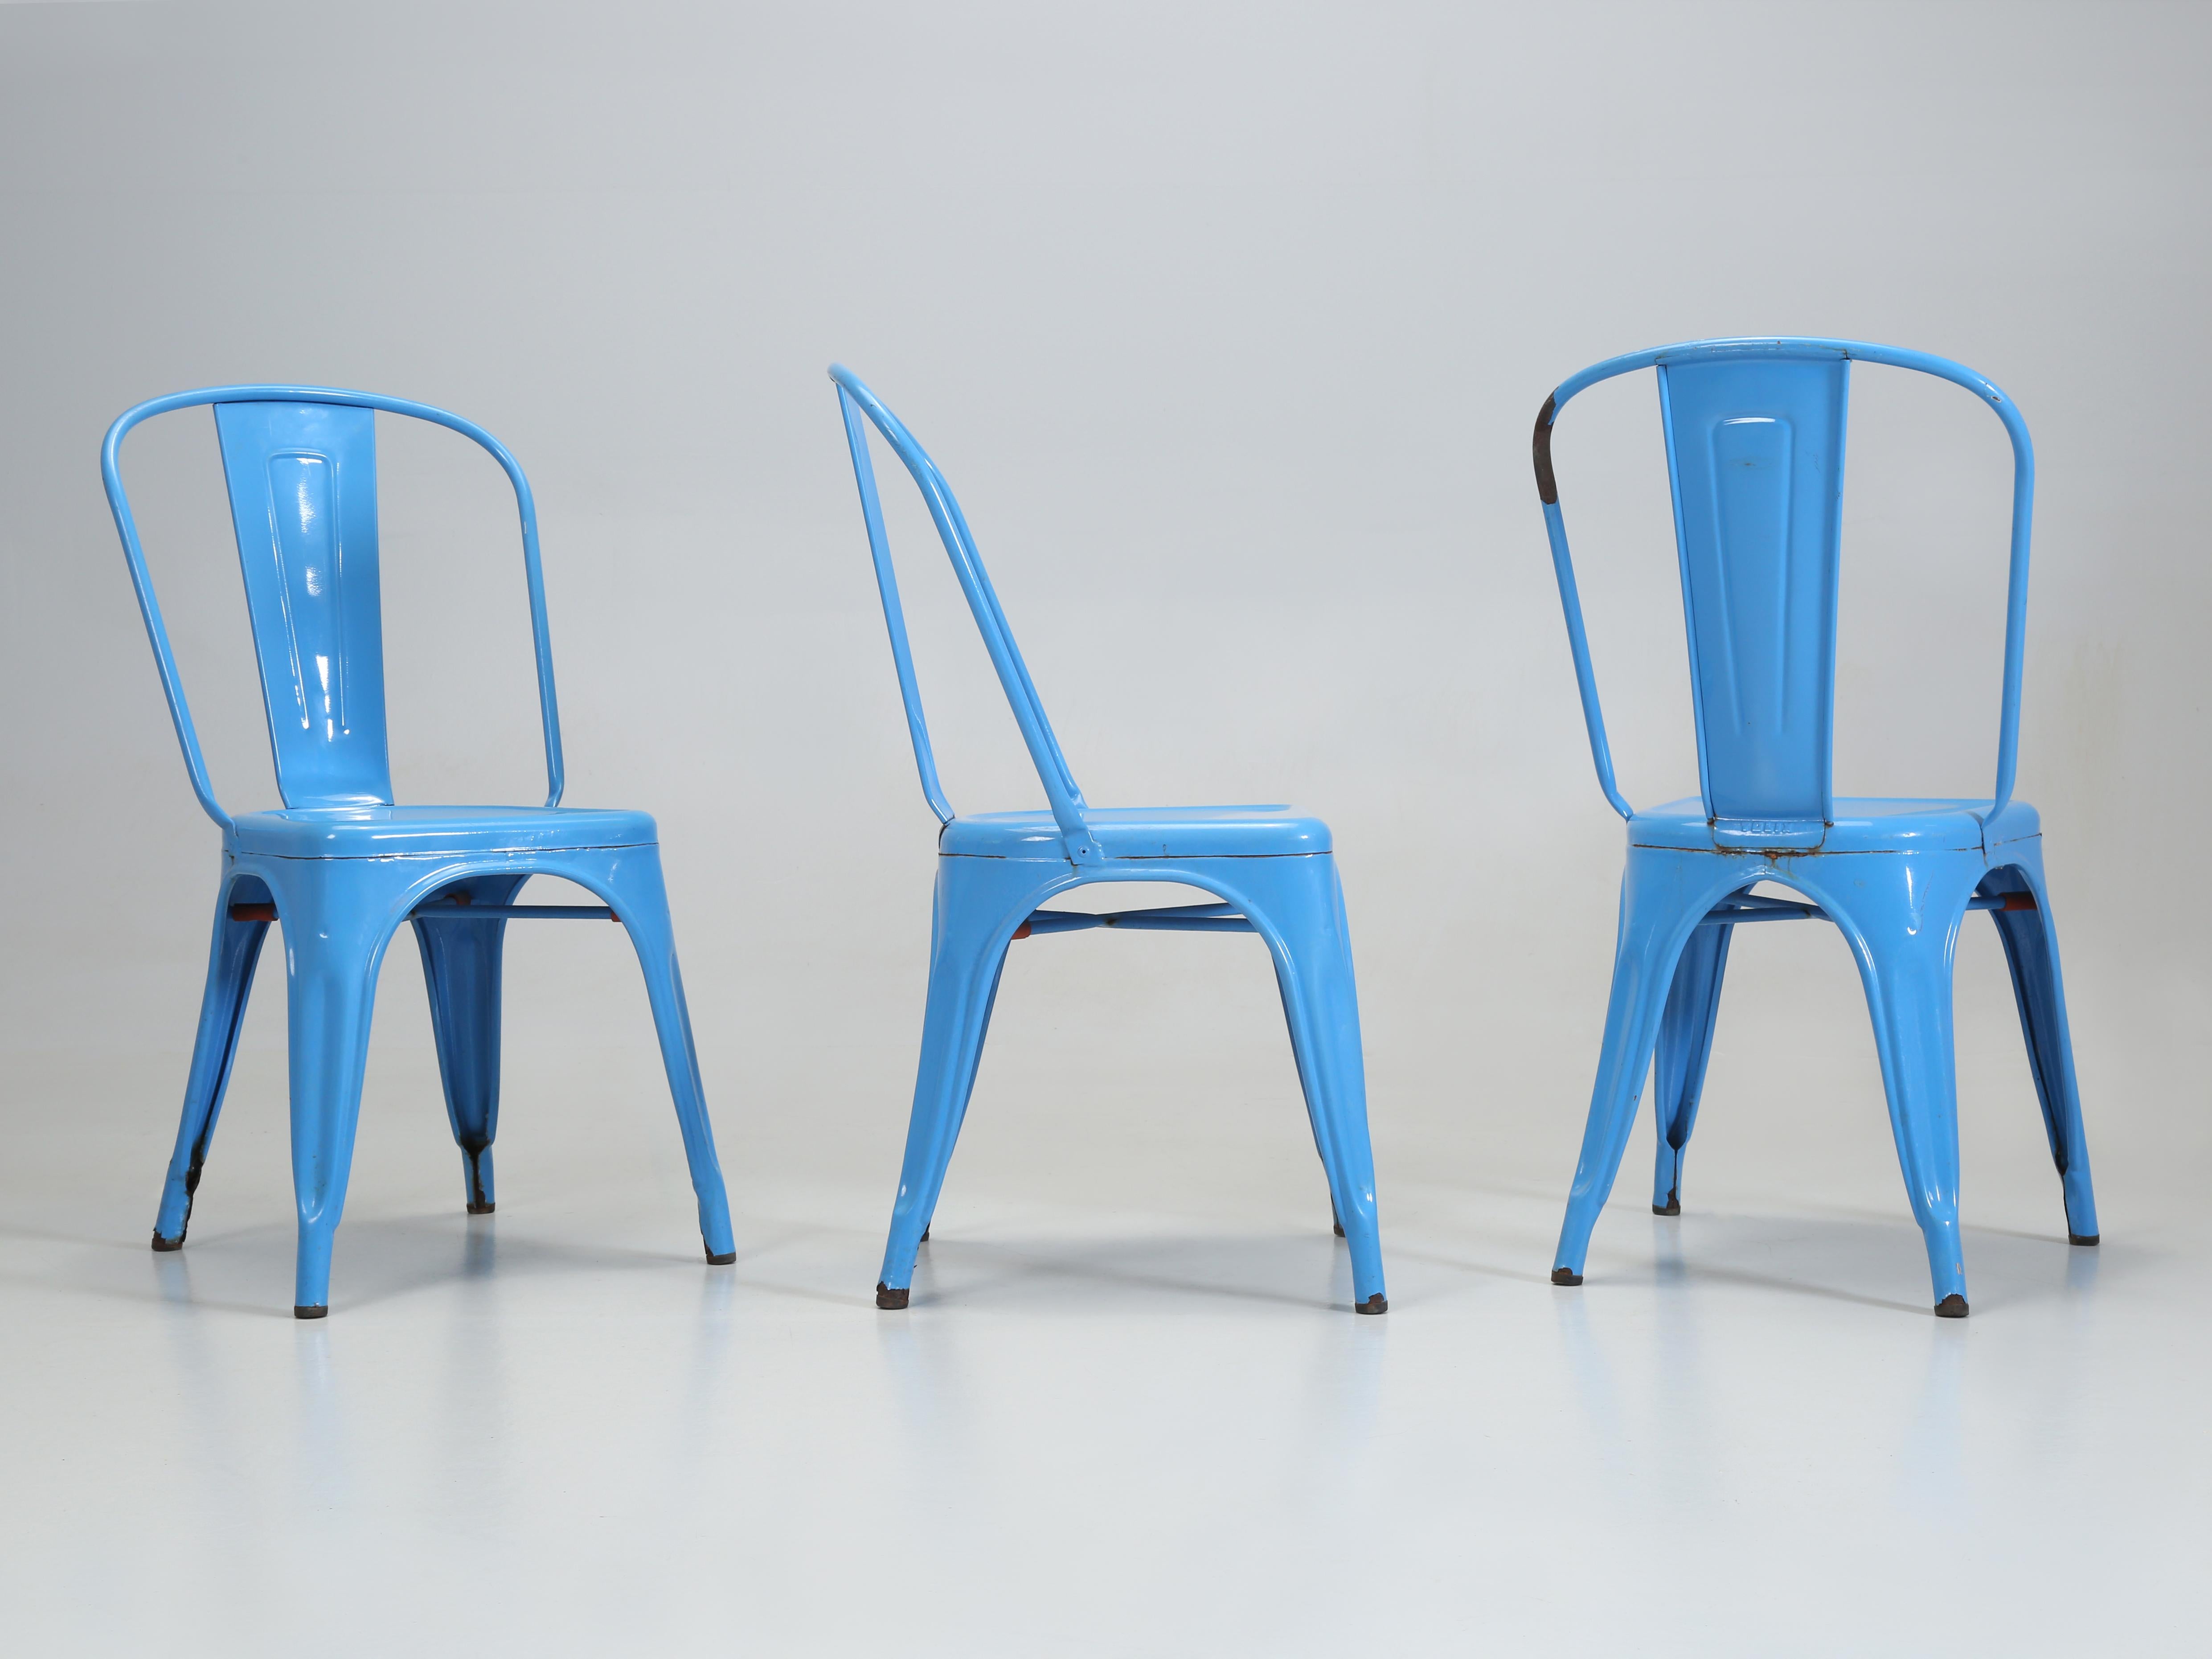 Genuine Vintage French Hand-Made Steel Stacking Chairs by Tolix. The Set of Tolix includes (4) Vintage Blue Steel Stacking chairs in a distressed look. Currently, we are stocking over (1300) pieces of Genuine Tolix Chairs, Tables and Tolix Stools in